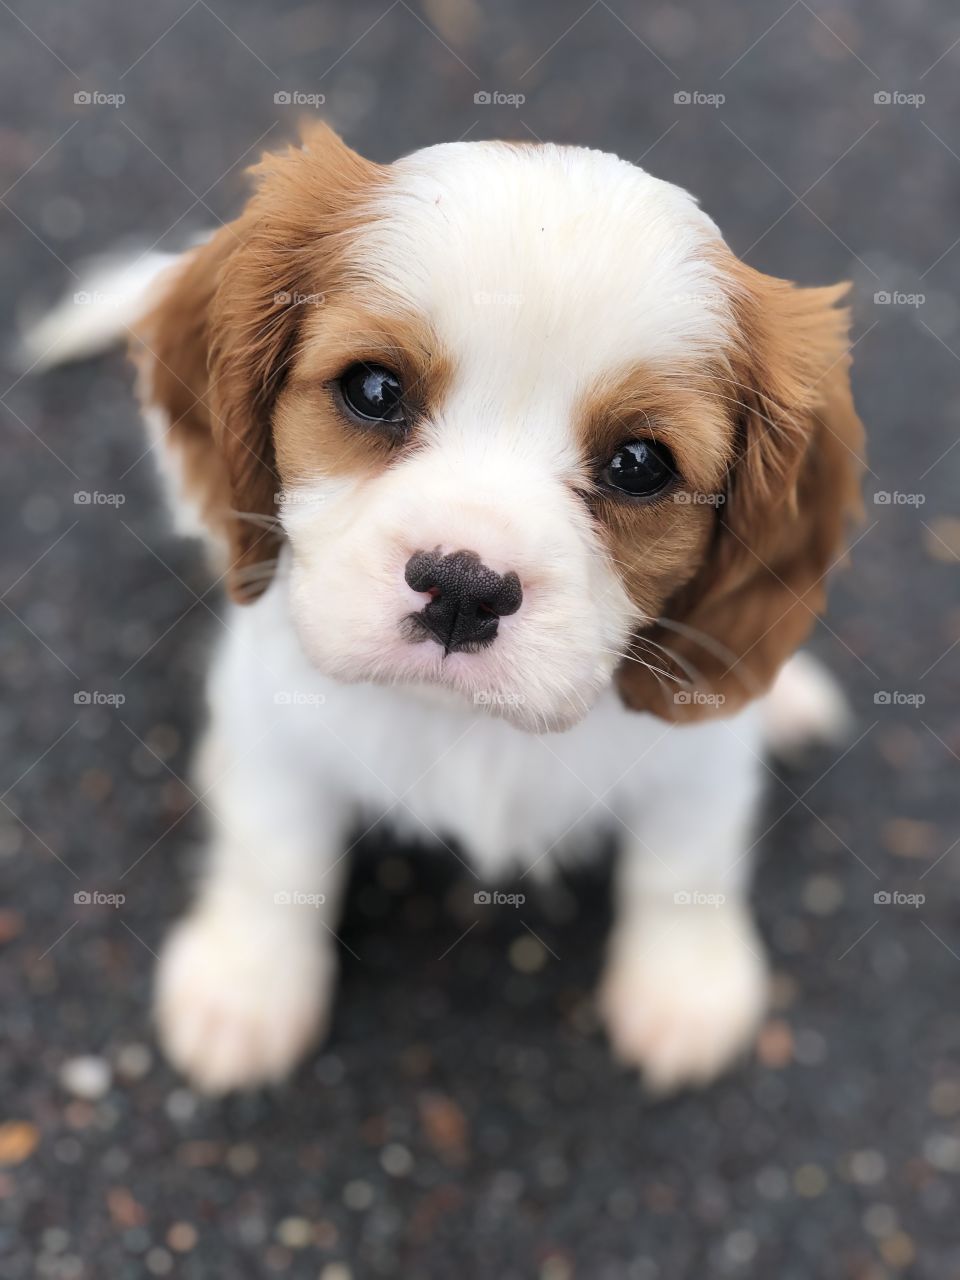 Adorable puppy eyes, how can you say no to those eyes! 